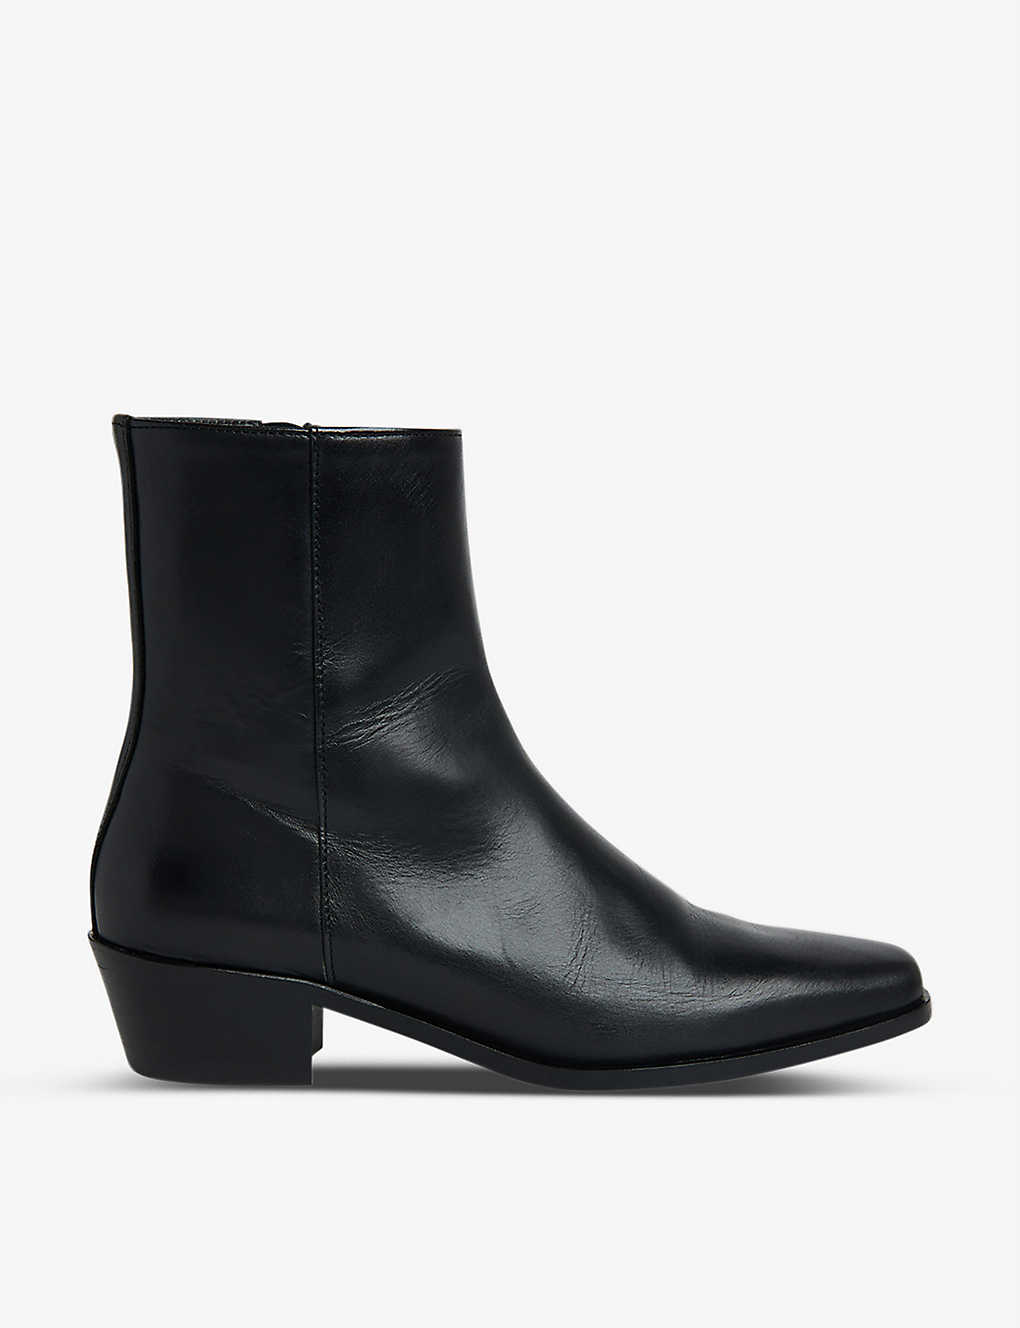 Whistles Women's Kara Square Toe Ankle Boots In Black